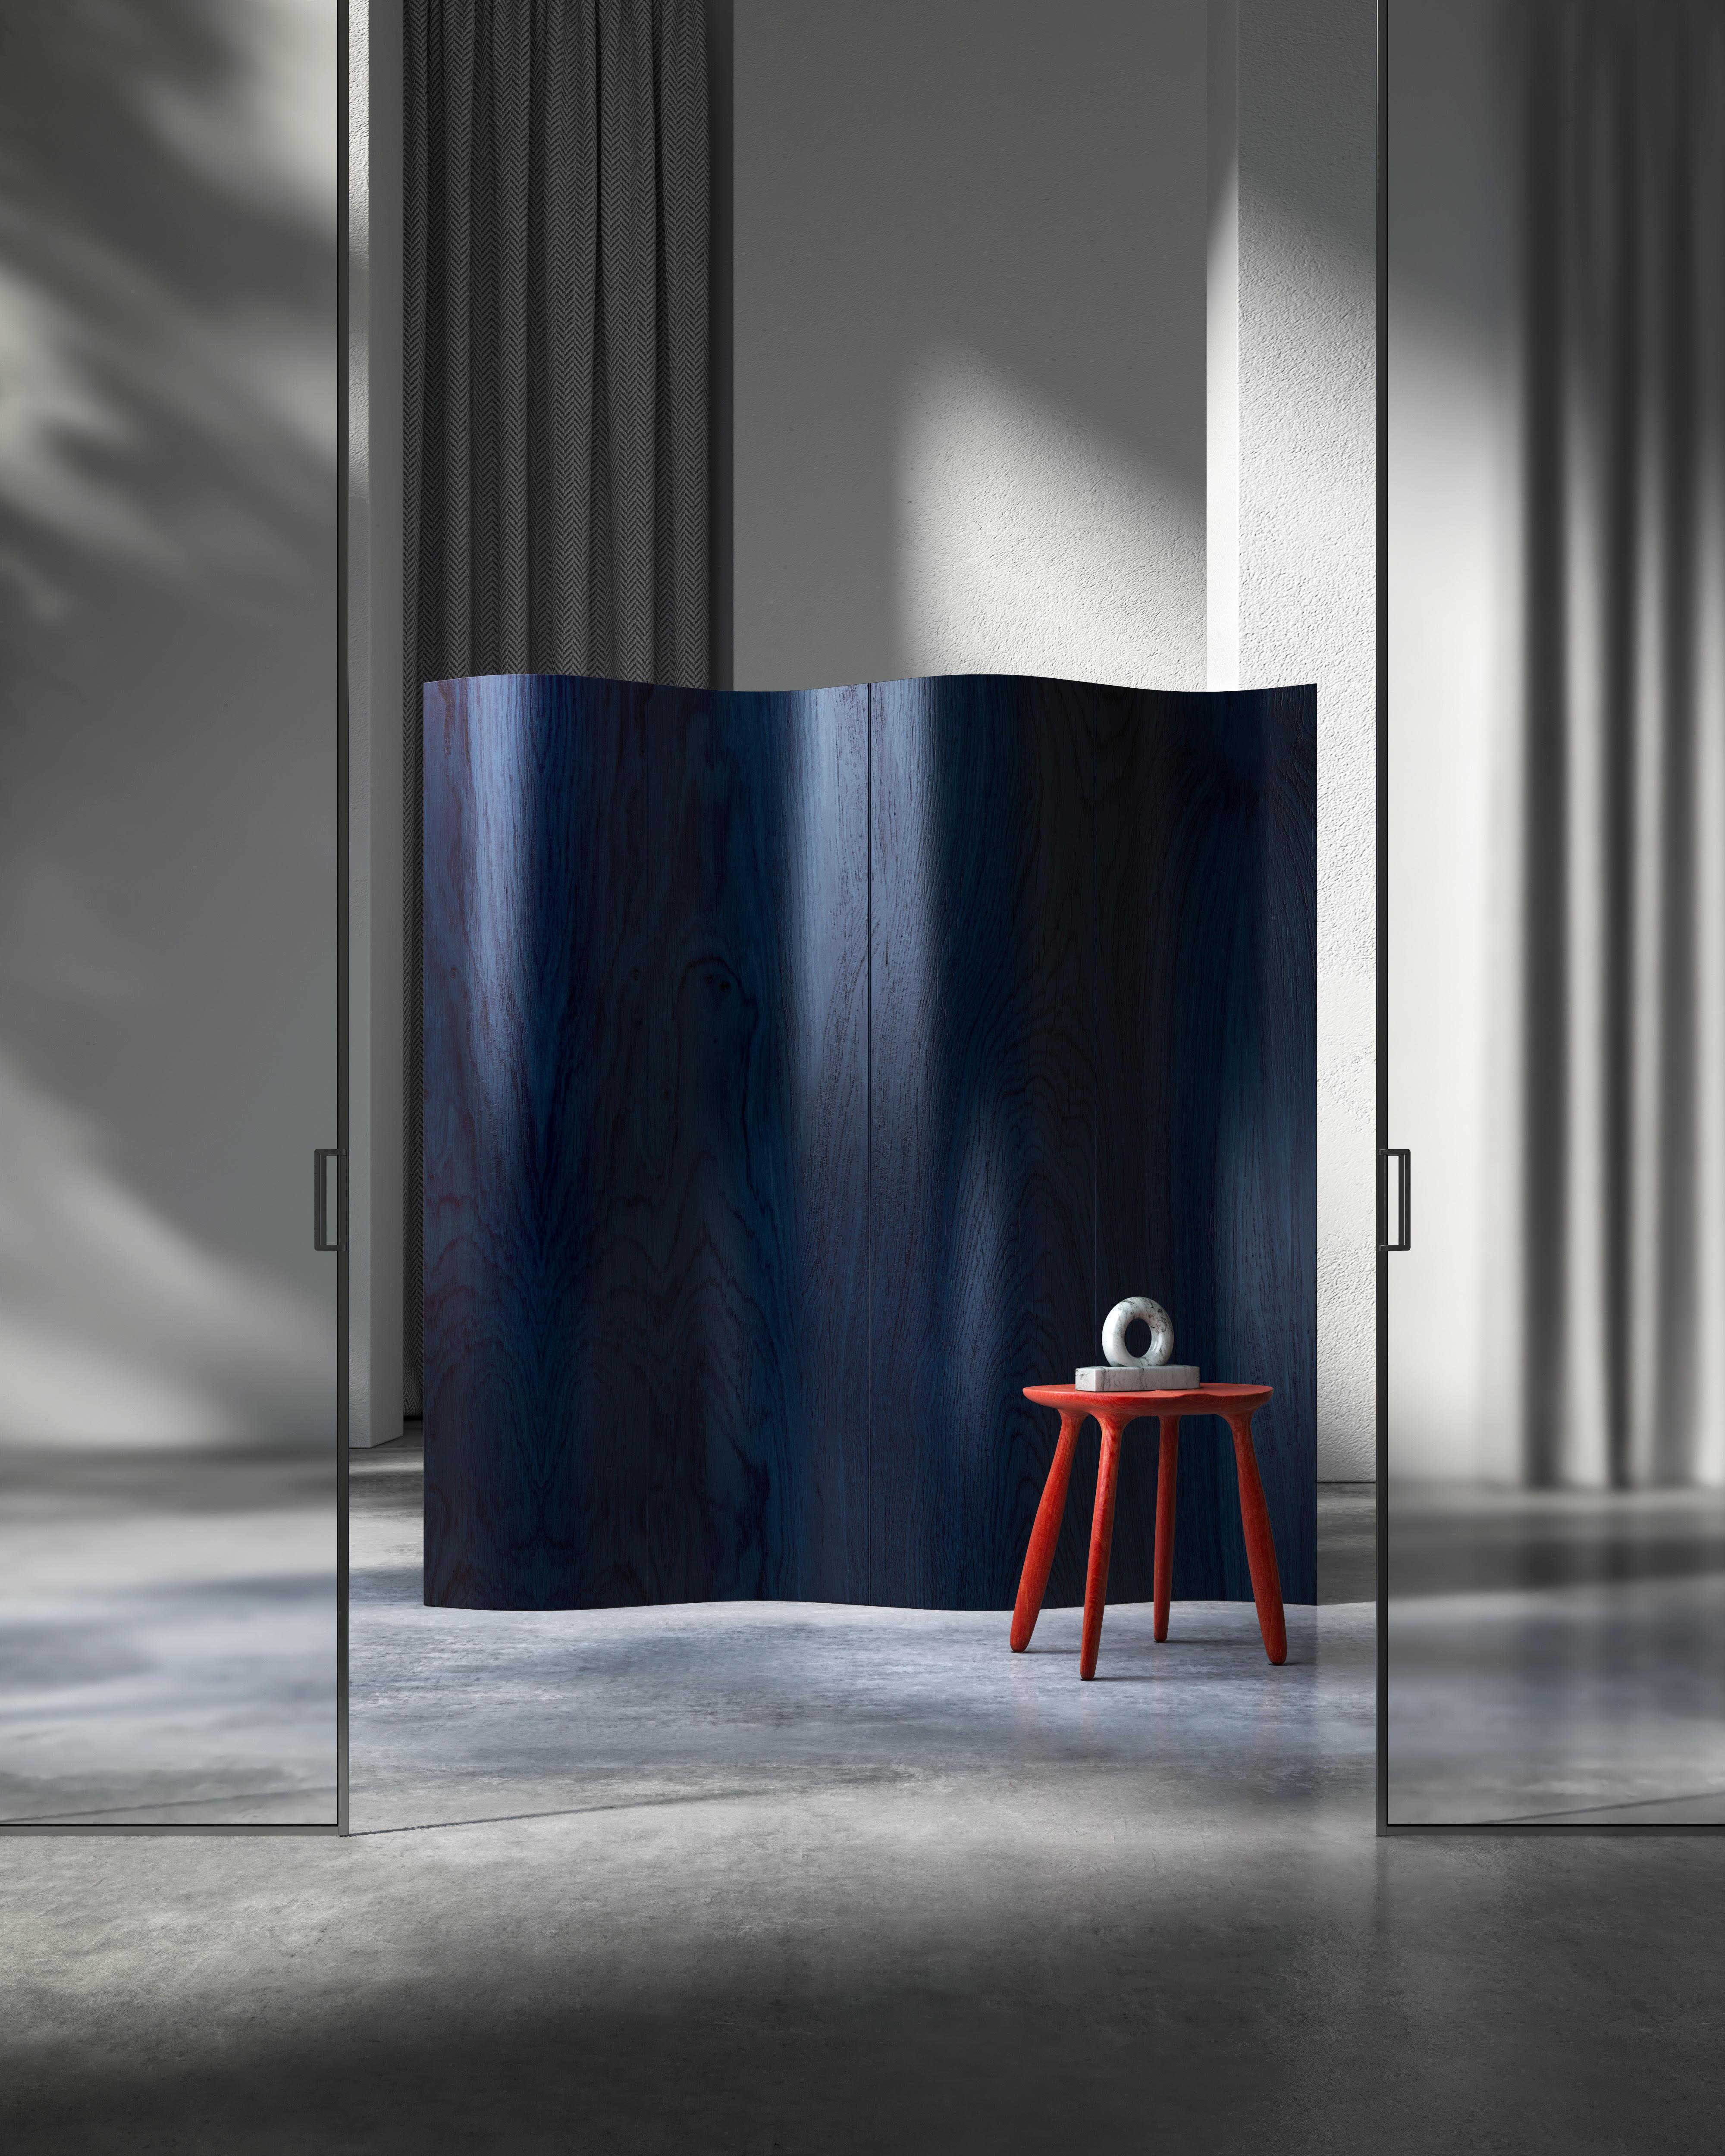 Nami Screen is presented by by Victoria Magniant for Galerie V

Like a big monochrome wave, the Nami screen is an eco-designed piece inviting simplicity and playfullness. It's light yet robust plywood structure allows to create versatile partitions